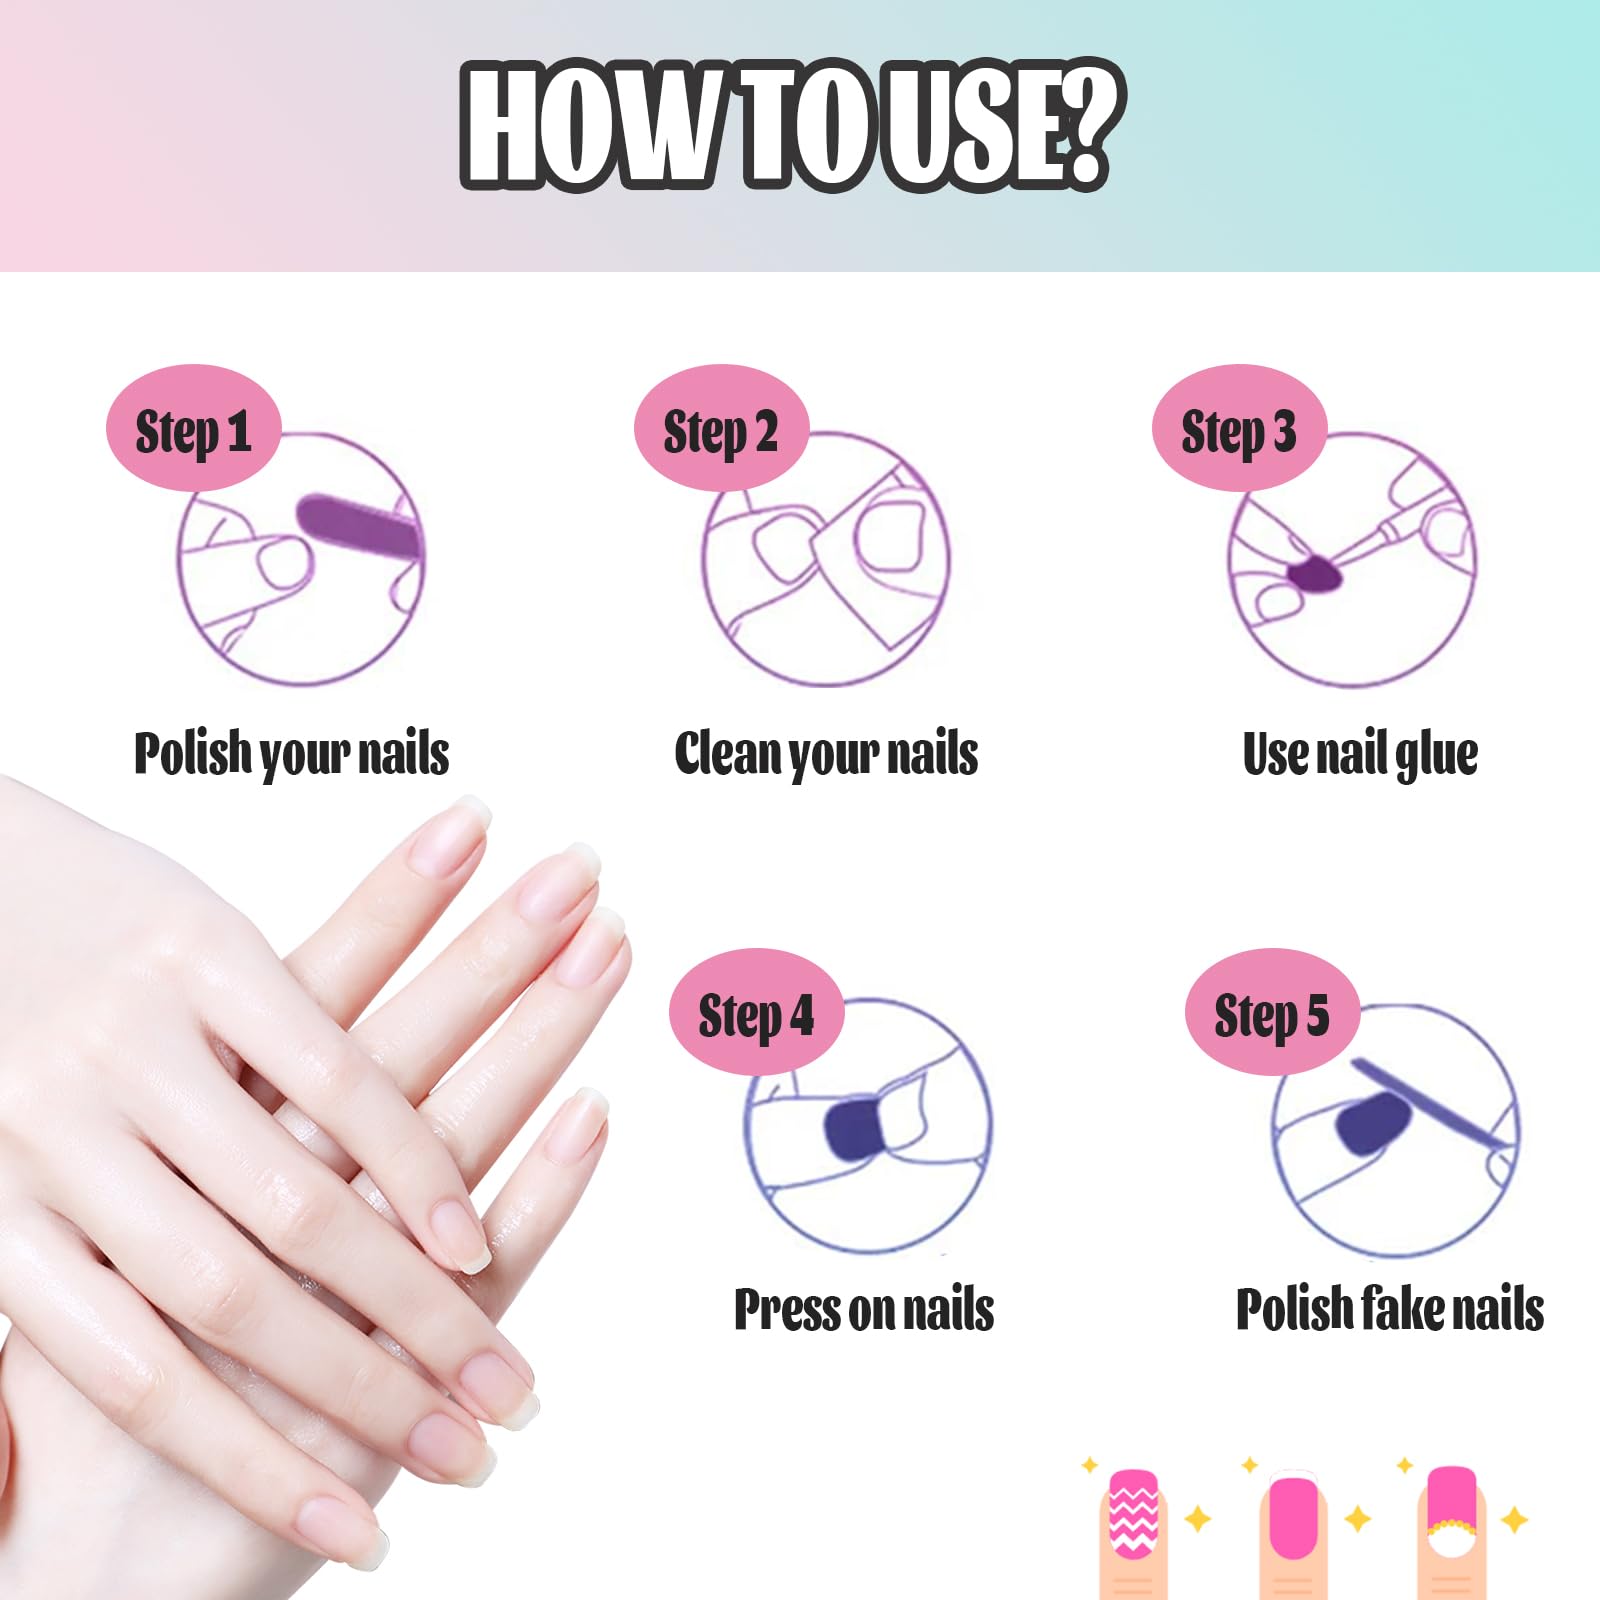 24pcs Short Square False French Tip False Nails Stick on Nails Glitter Press on Nails Removable Glue - on Fake Nails Acrylic Full Cover Nails Women Girls Nail Art Accessories (French White Edge)